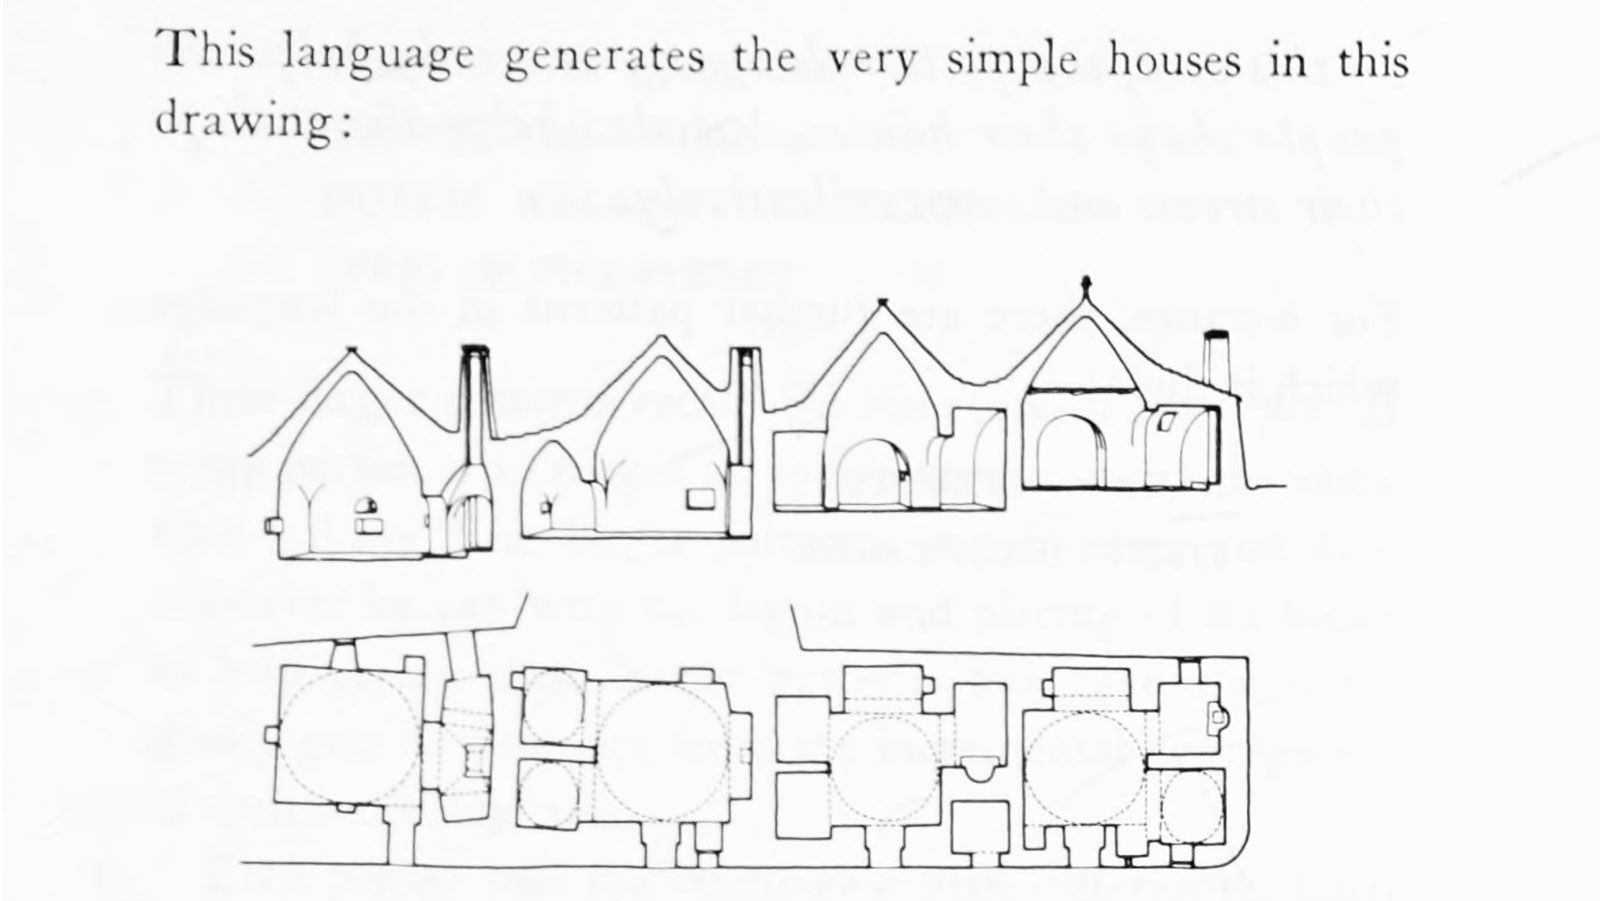 Houses generated by the pattern